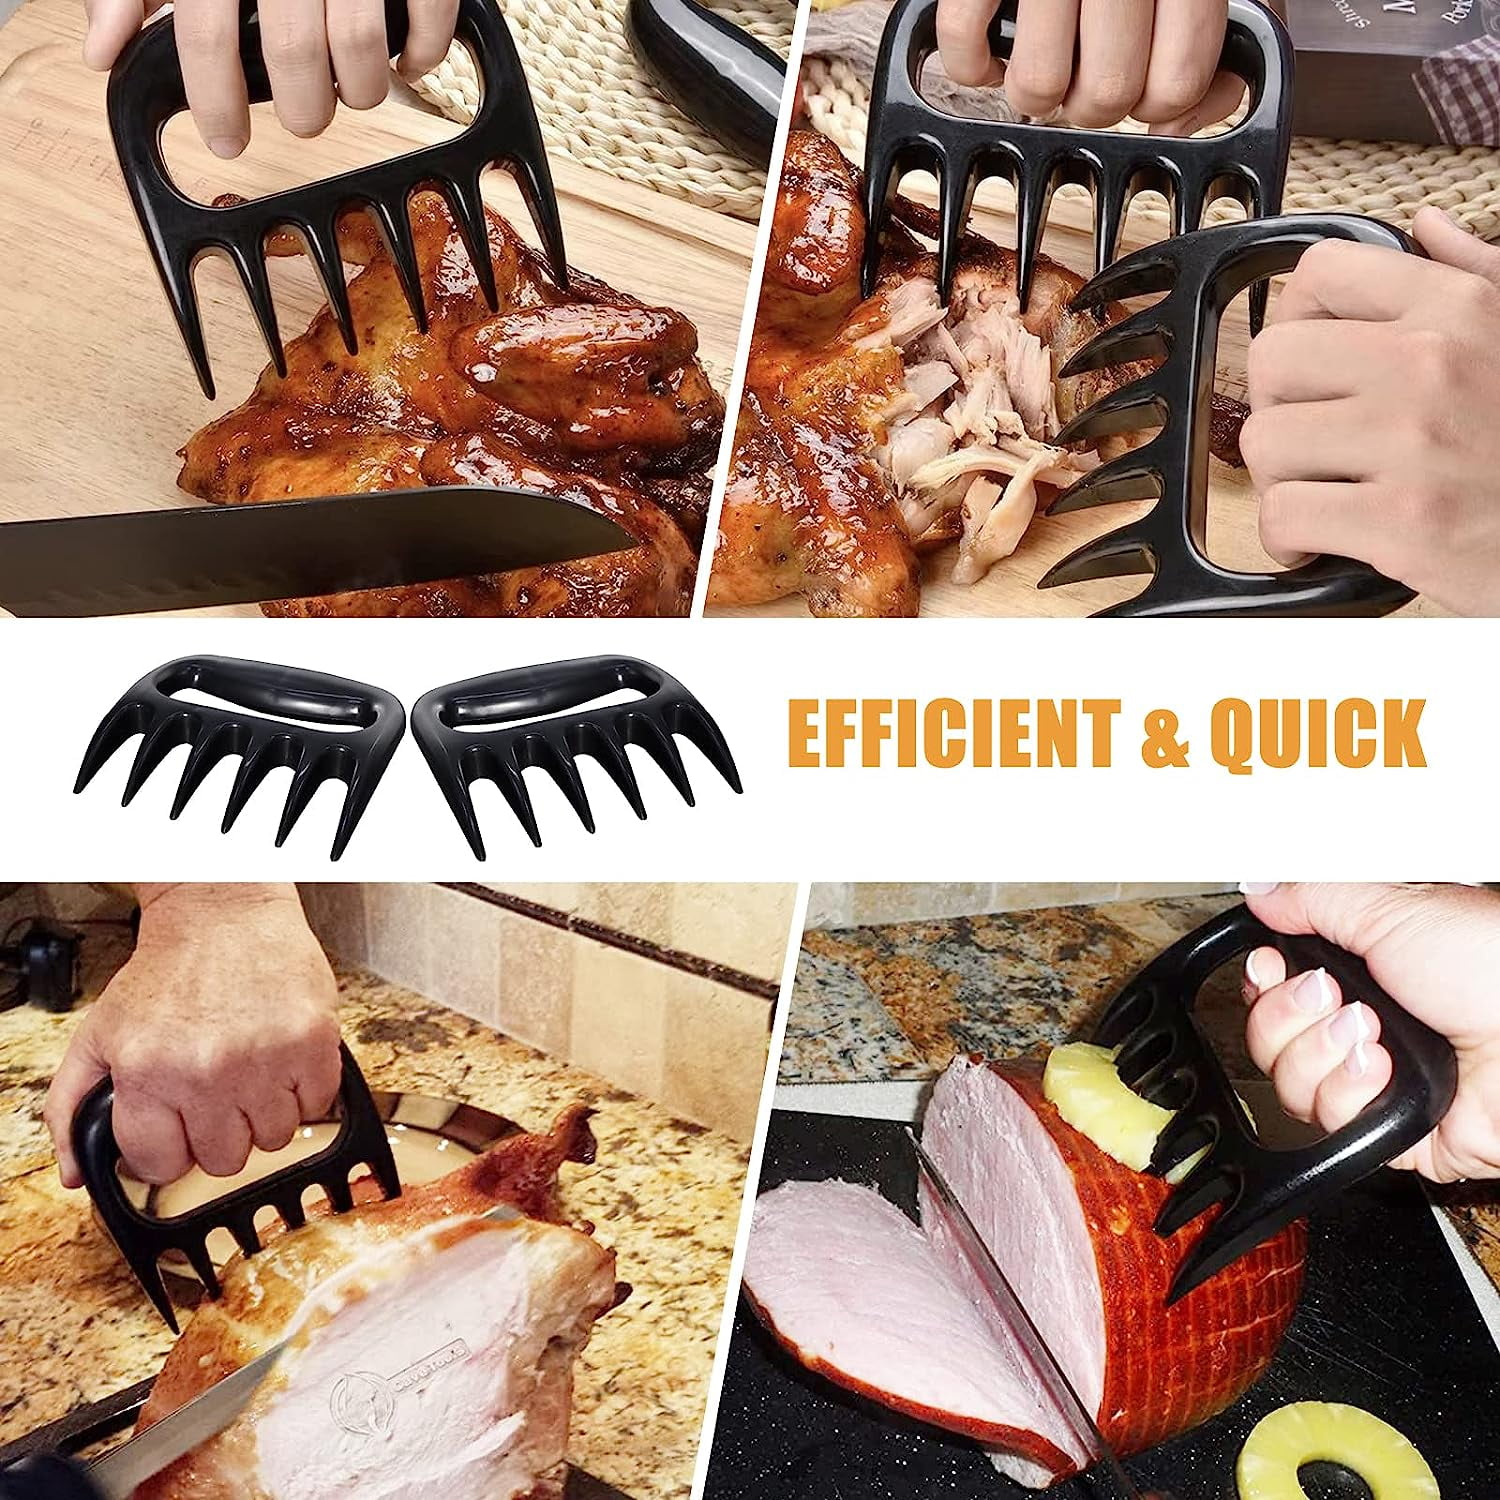 TOPULORS Ideal Gift Meat Claws-Strongest BBQ Meat Handler Forks Pulled Pork  Shred Handling Meat & Carving Turkey Claws Handler Set for Your Smoker 